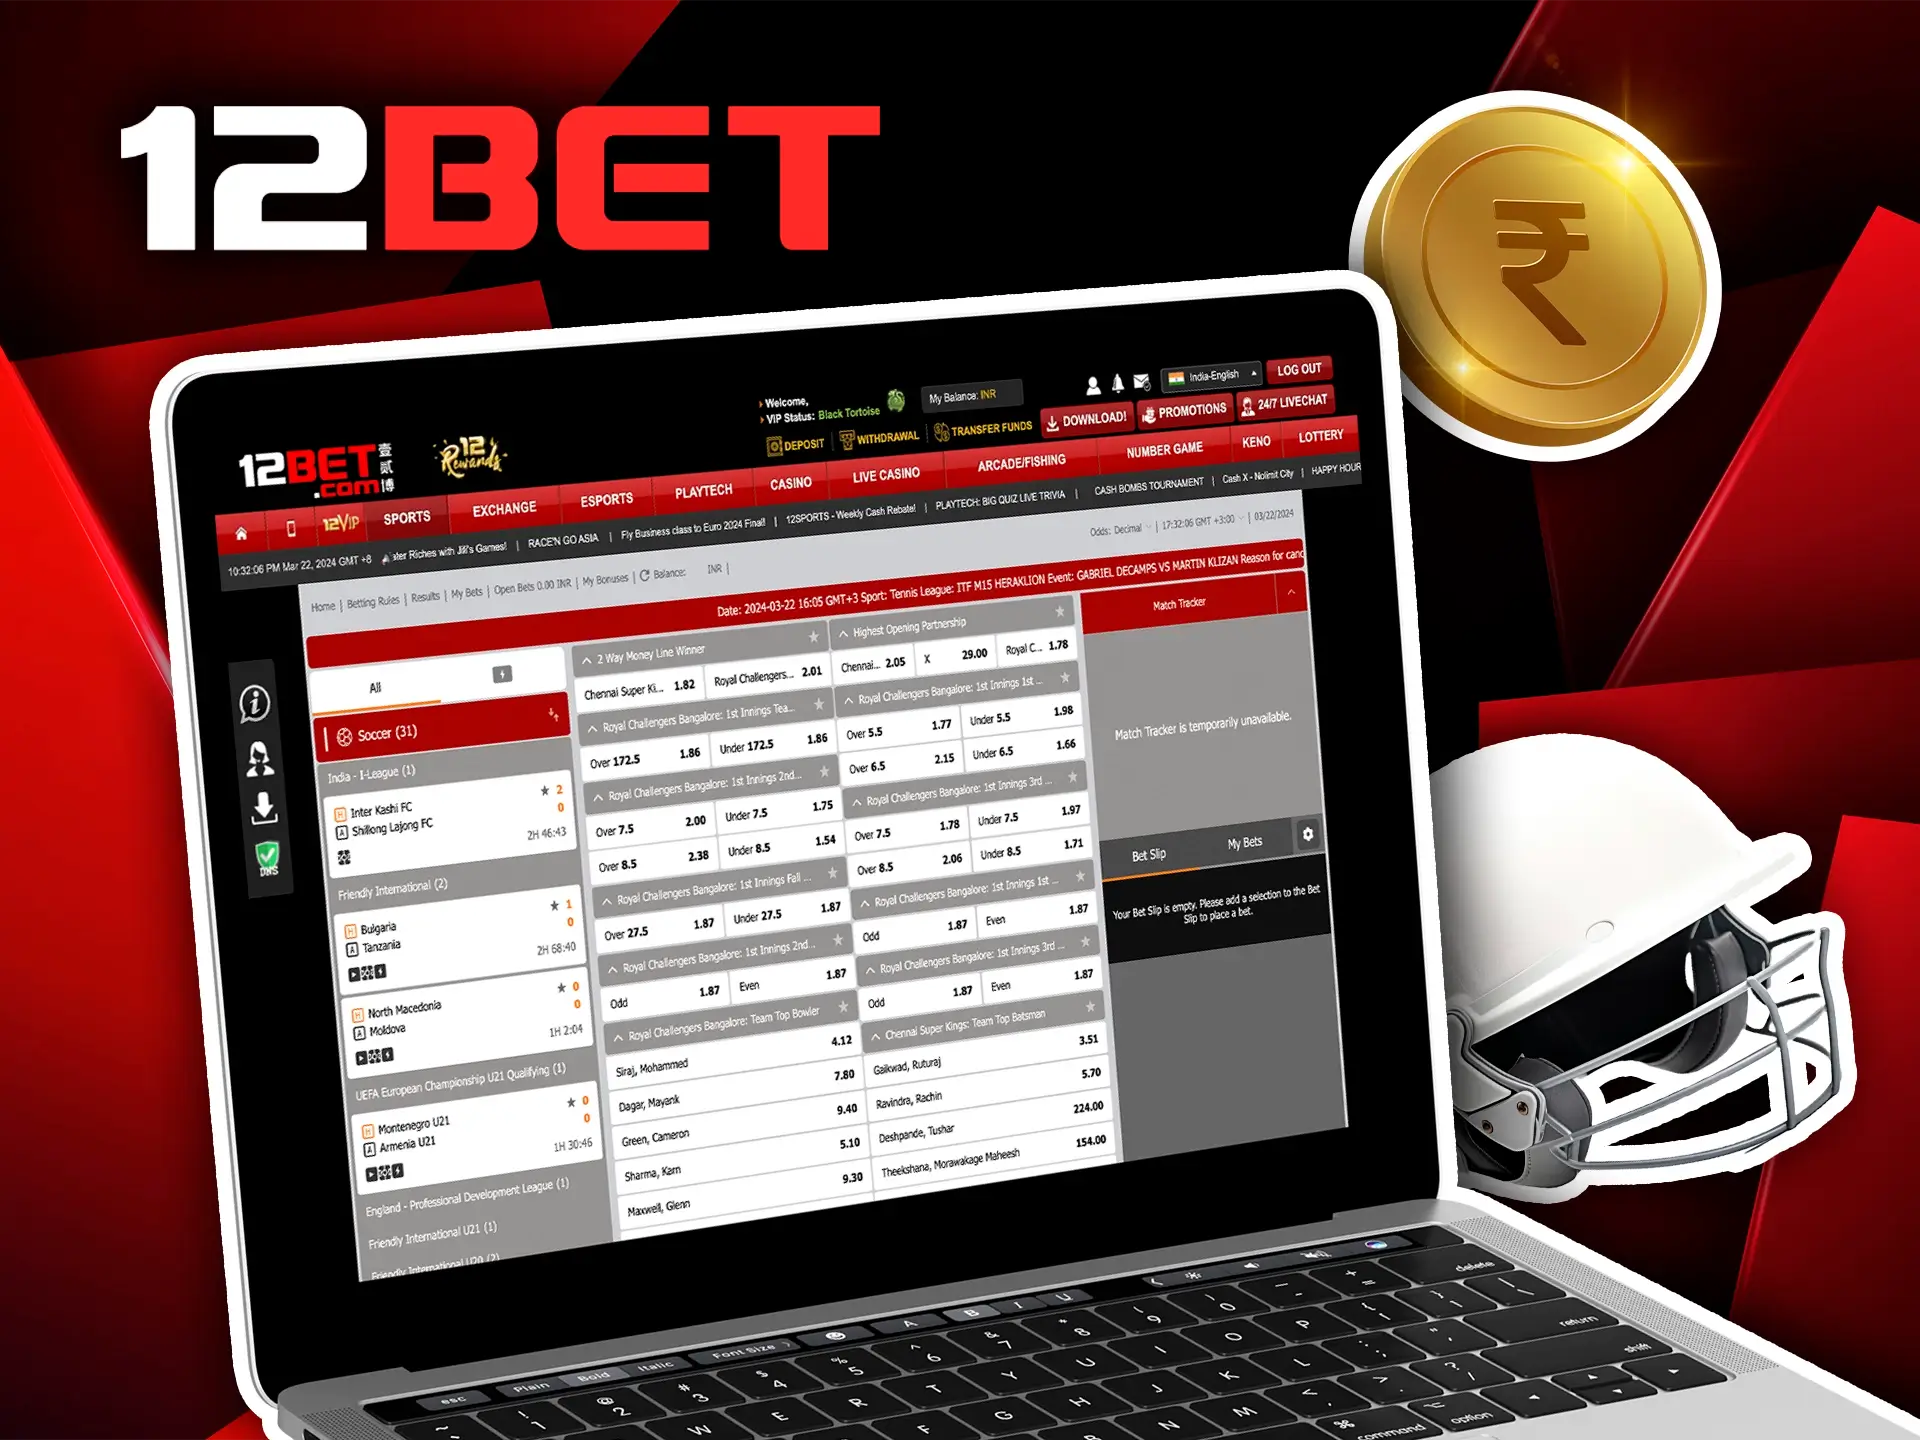 Familiarise yourself with the odds at 12Bet to manage your money wisely when betting.